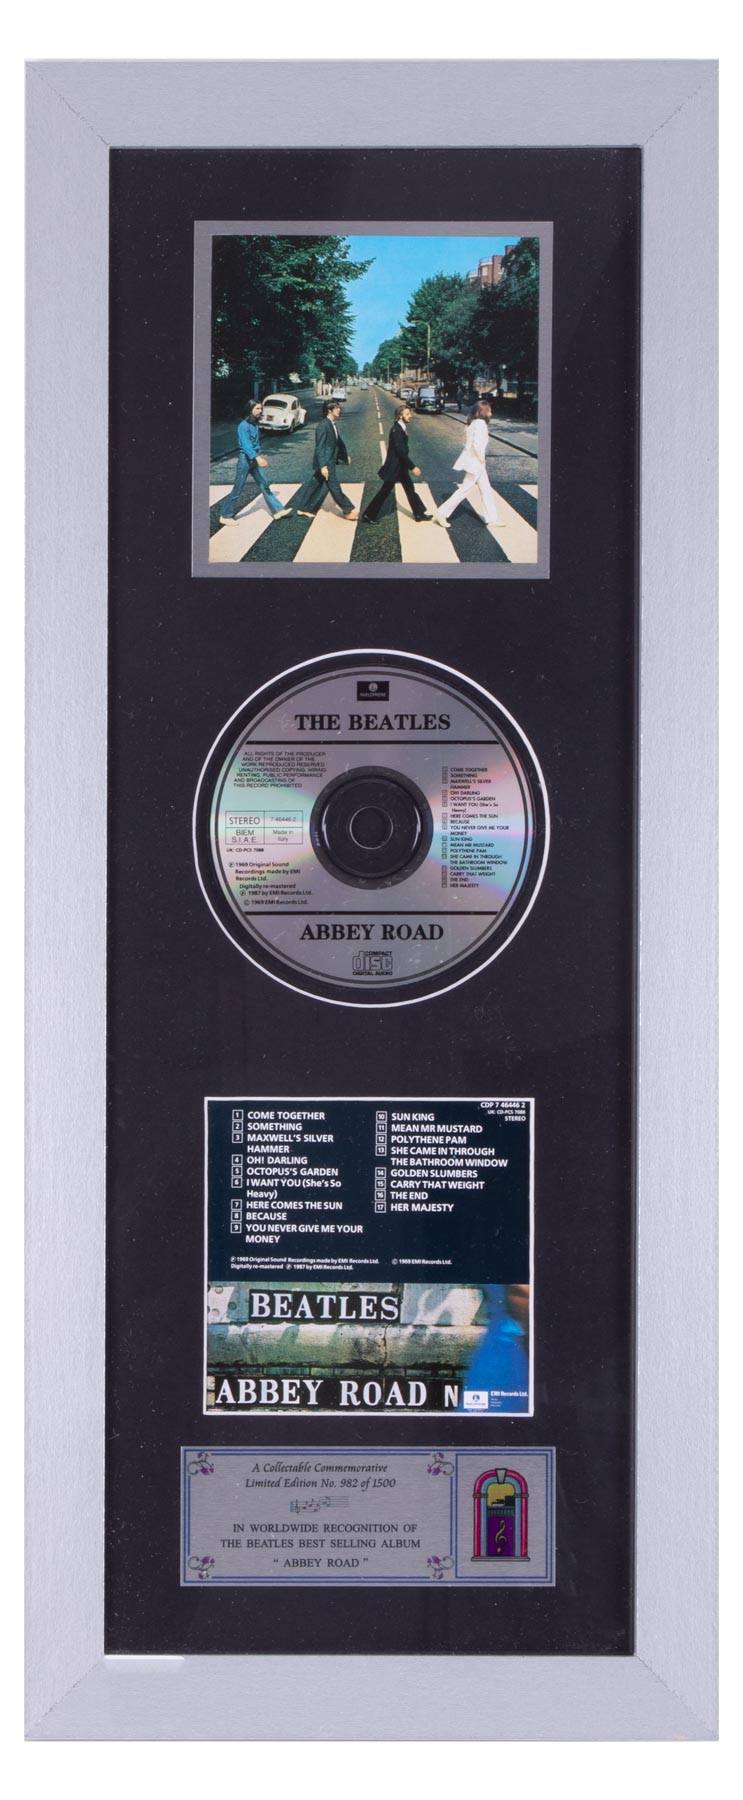 The Beatles Abbey Road CD, a collectable commemorative limited edition No.982/1500, In Worldwide